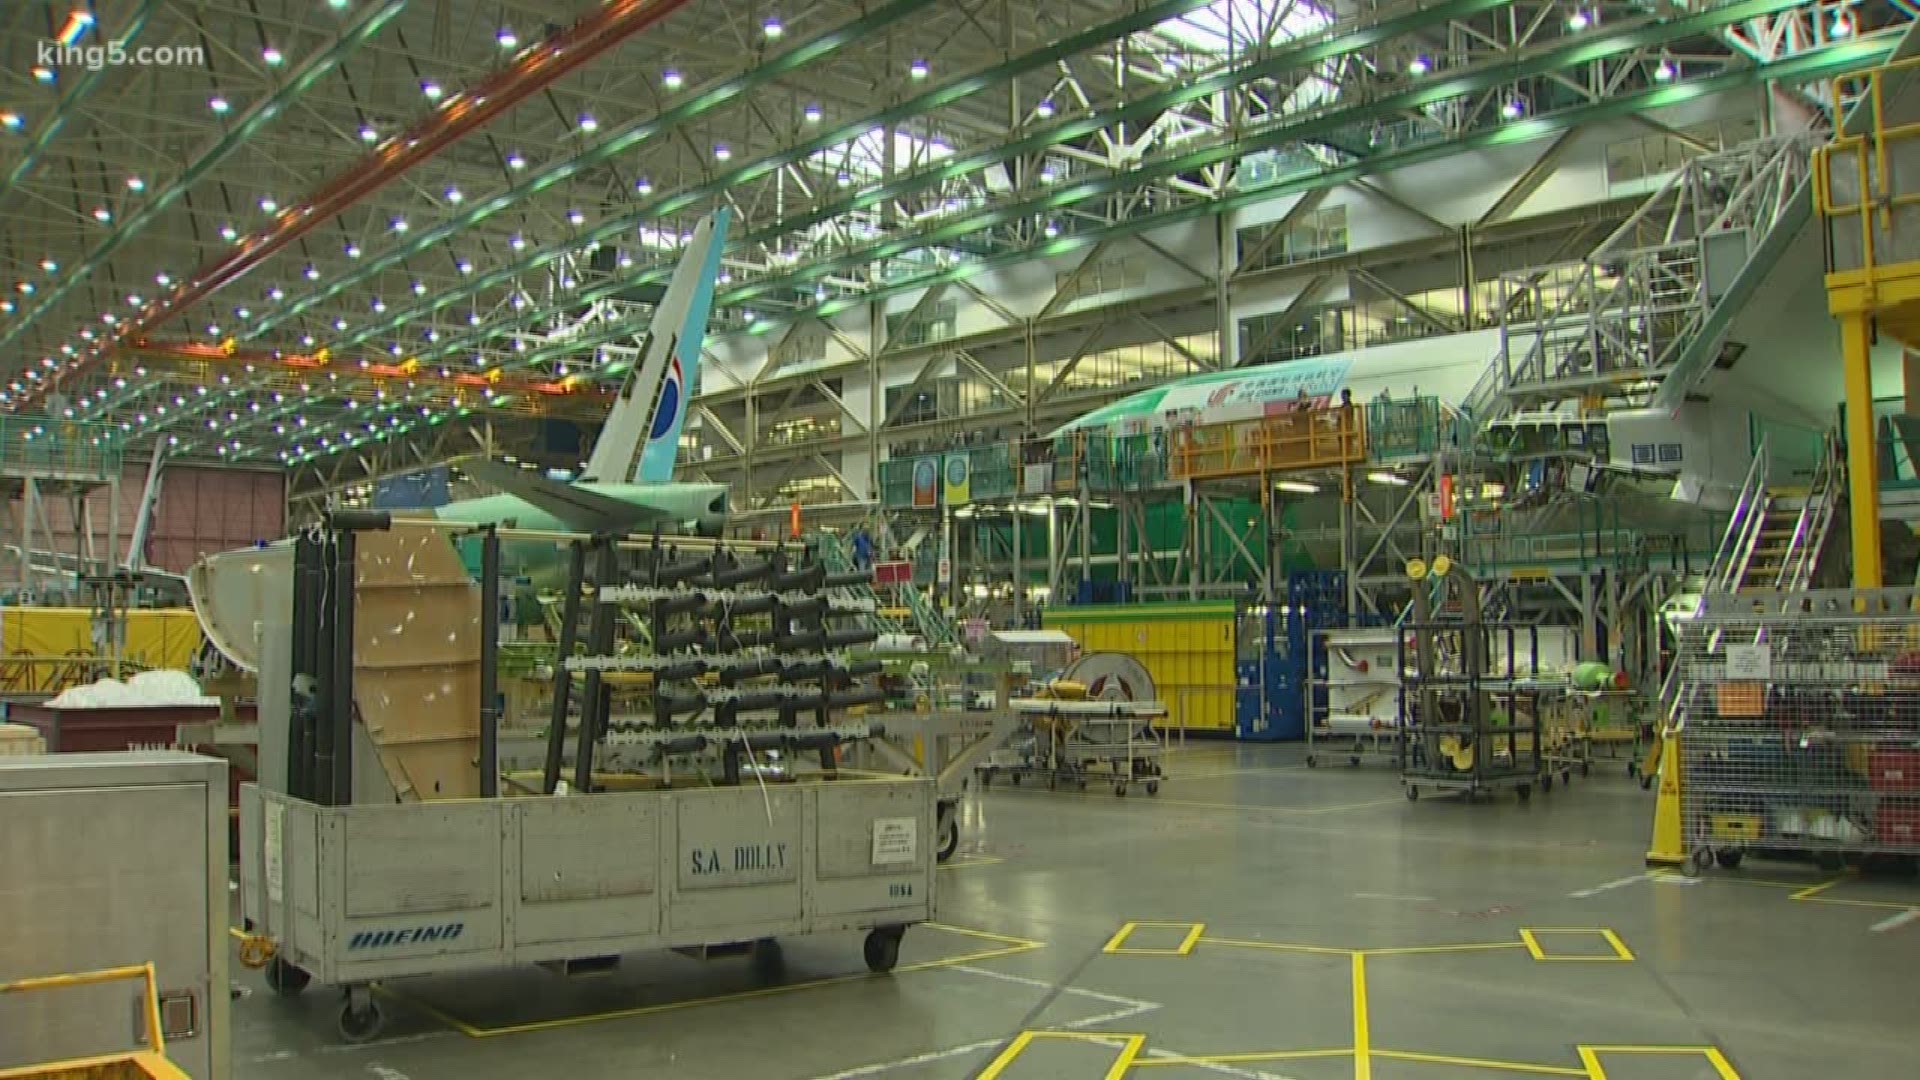 After more than 20 Boeing employees tested positive for coronavirus, the company announced it would suspend production operations in the Puget Sound area.